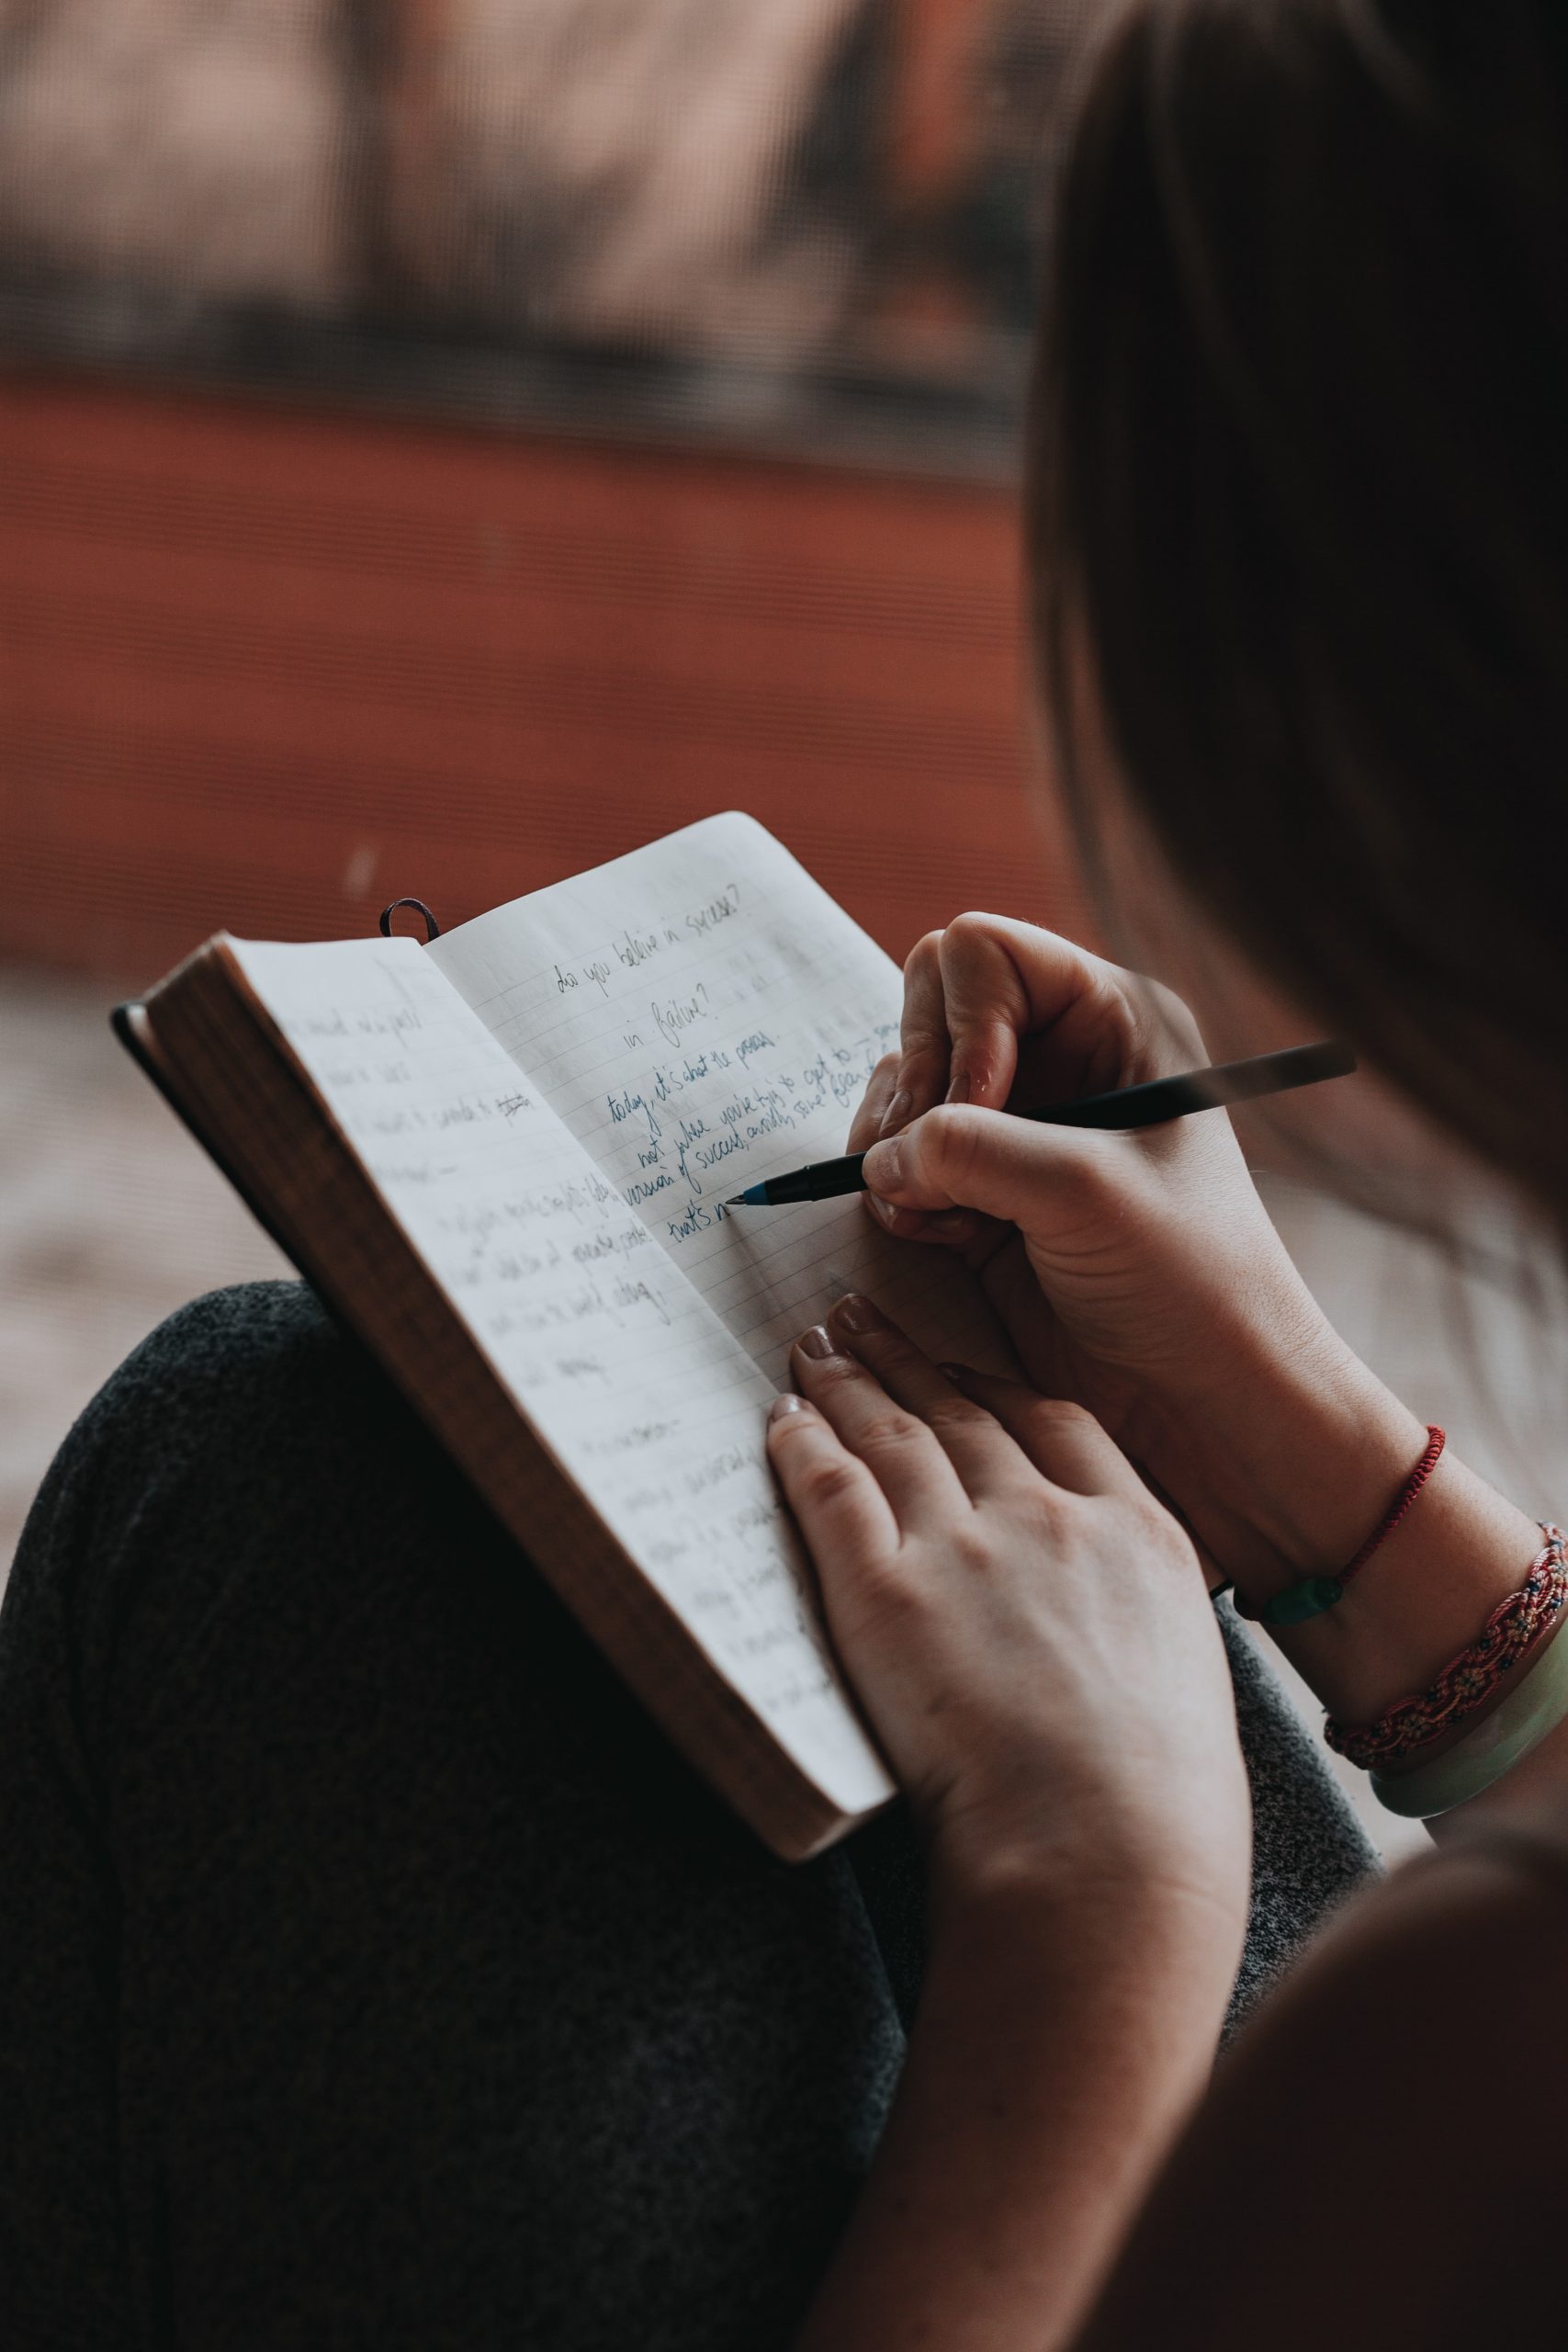 Woman writing in a diary in cursive with a pen and she has bracelets on